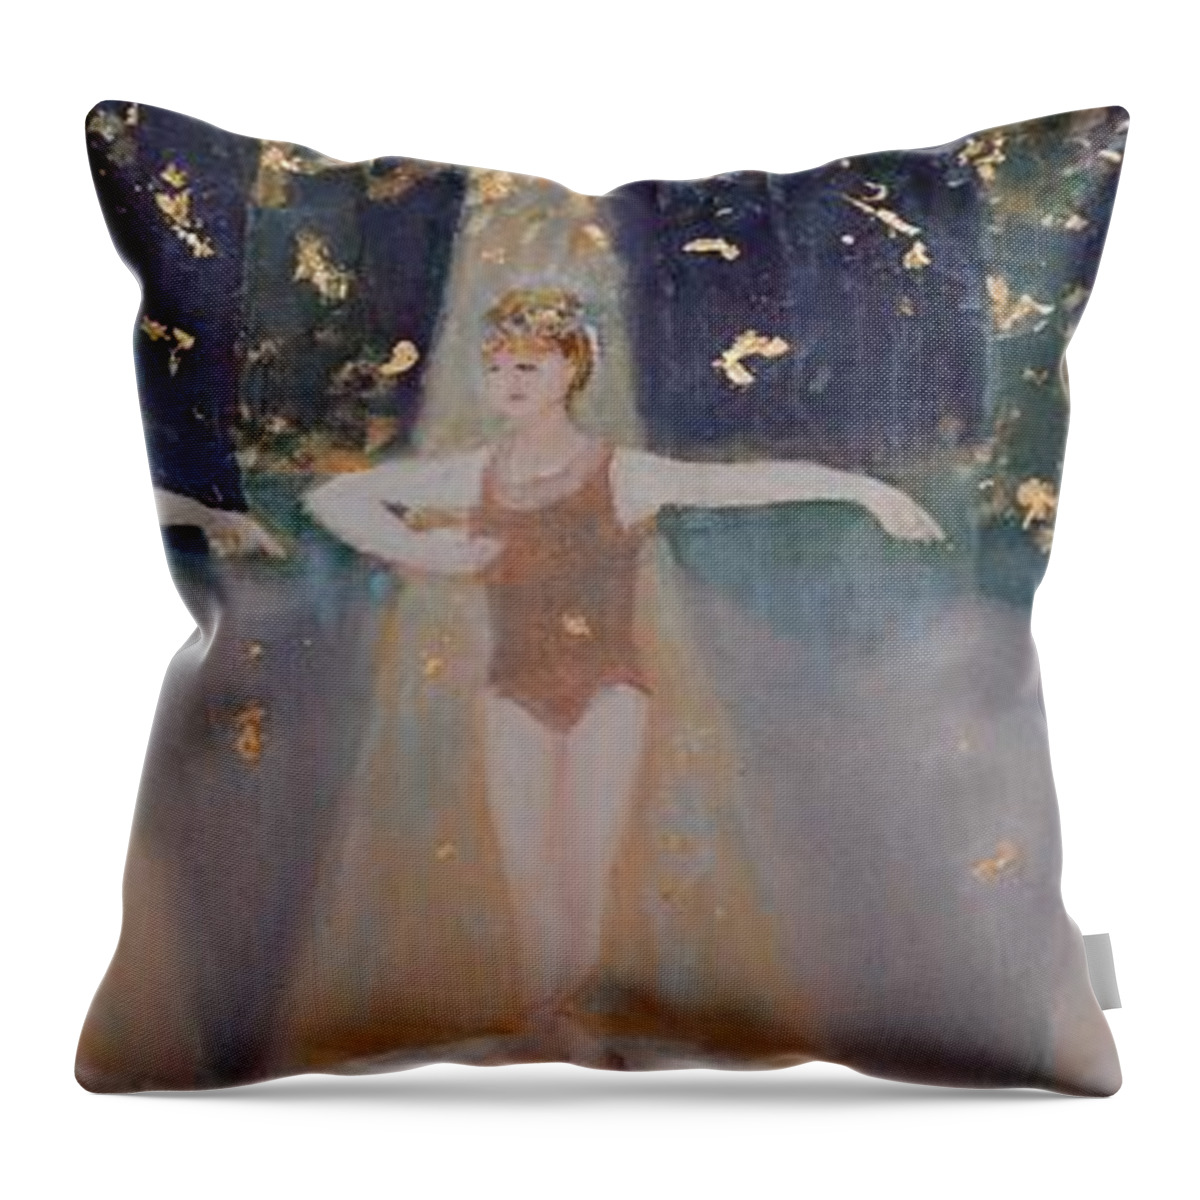 Ballet Throw Pillow featuring the painting Les Cinq Positions by Julie Todd-Cundiff